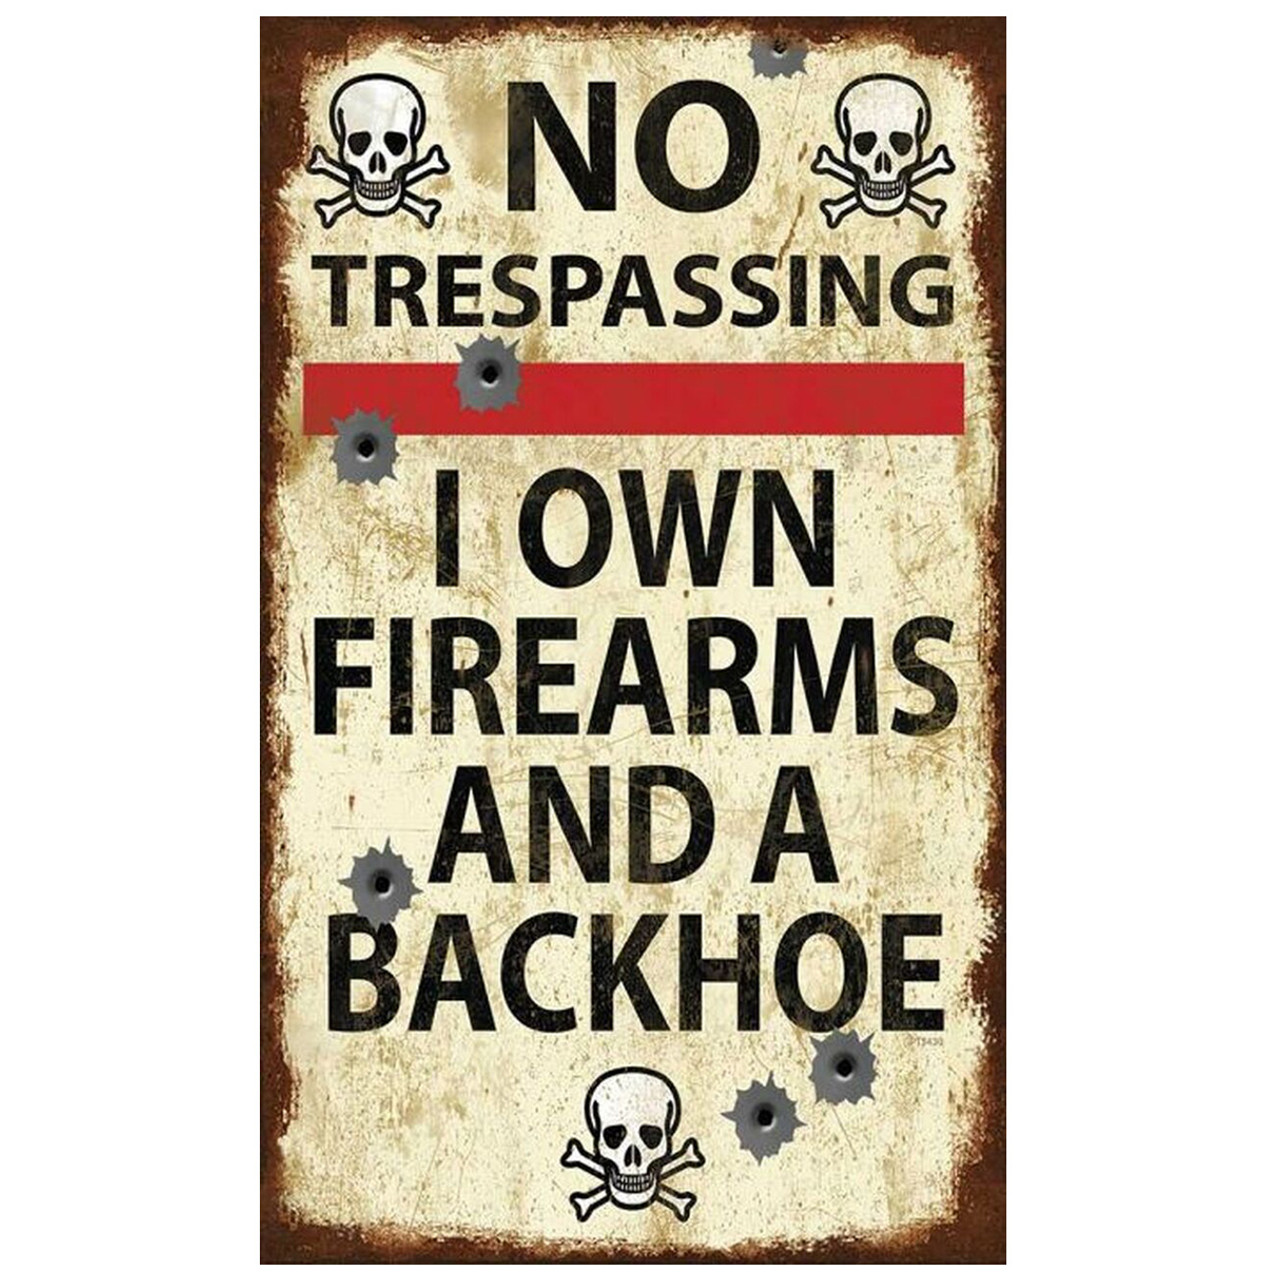 No Trespassing Vintage Metal Sign 8 x 14 Inches